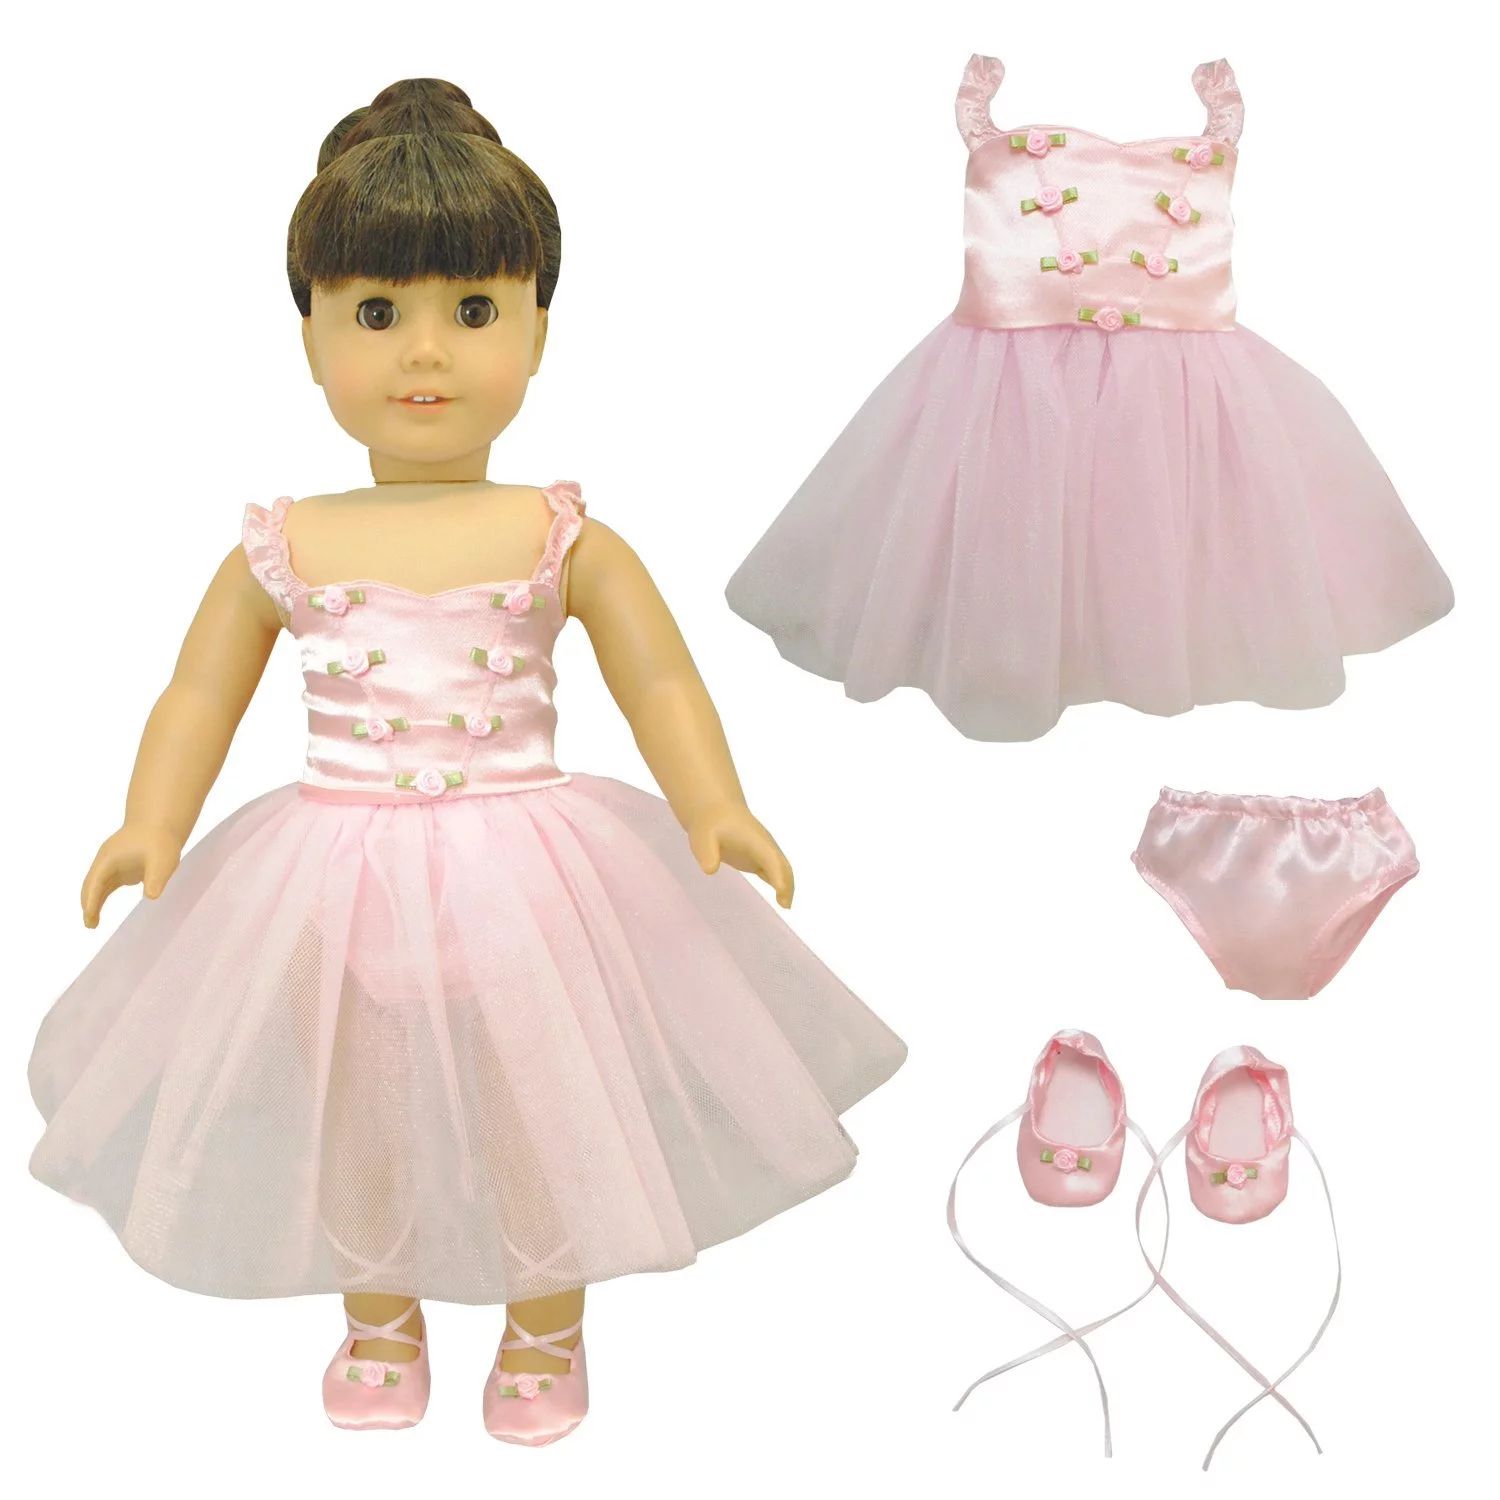 Doll Clothes - Ballet Ballerina Fits American Girl & Other 18 inch Inch Dolls | Walmart (US)